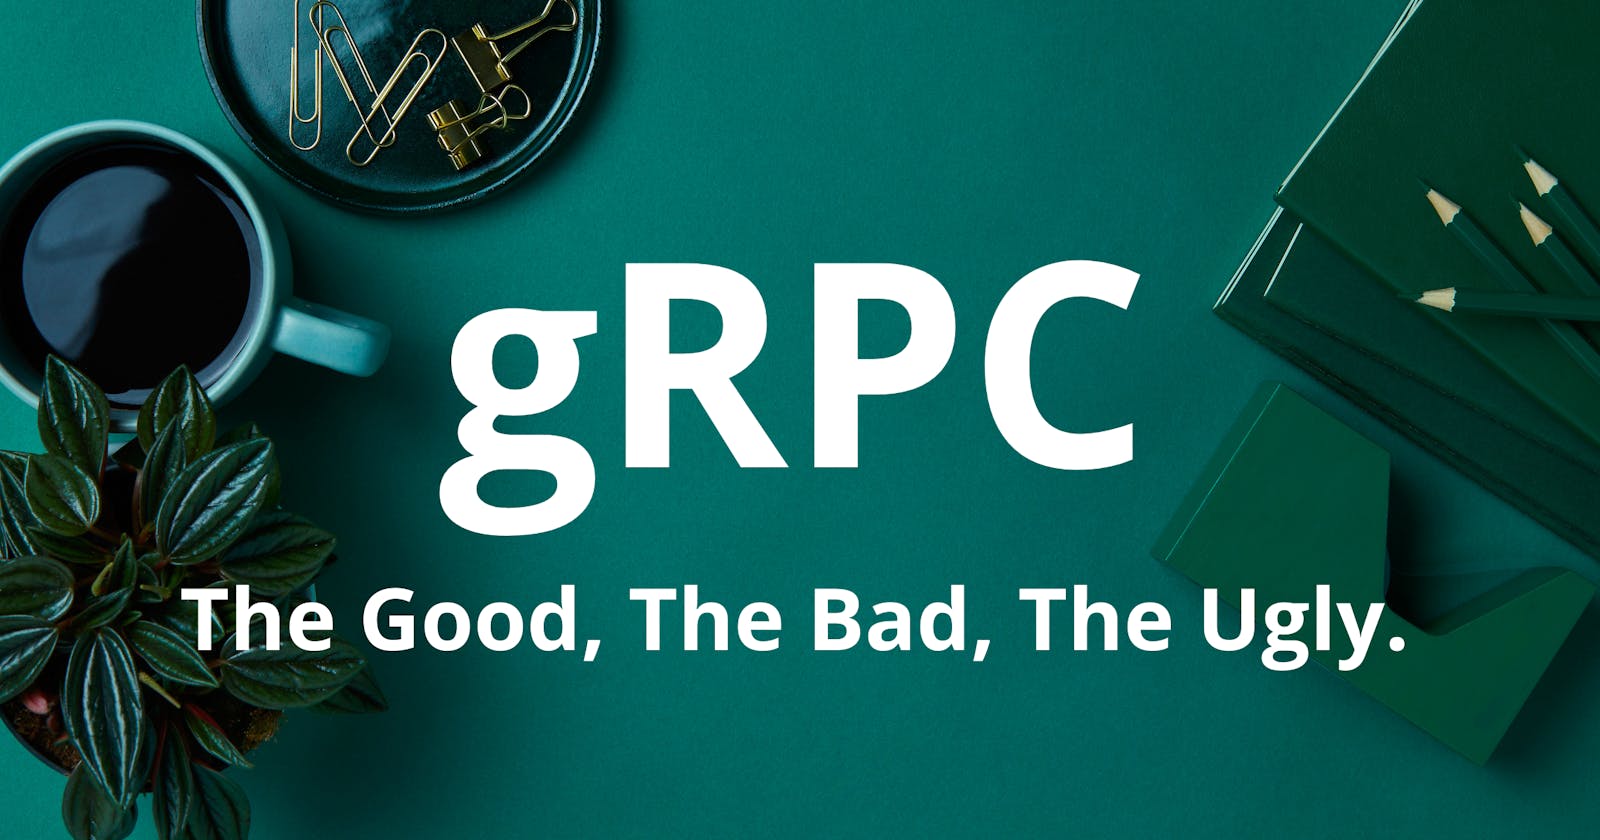 gRPC: The Good, The Bad, The Ugly